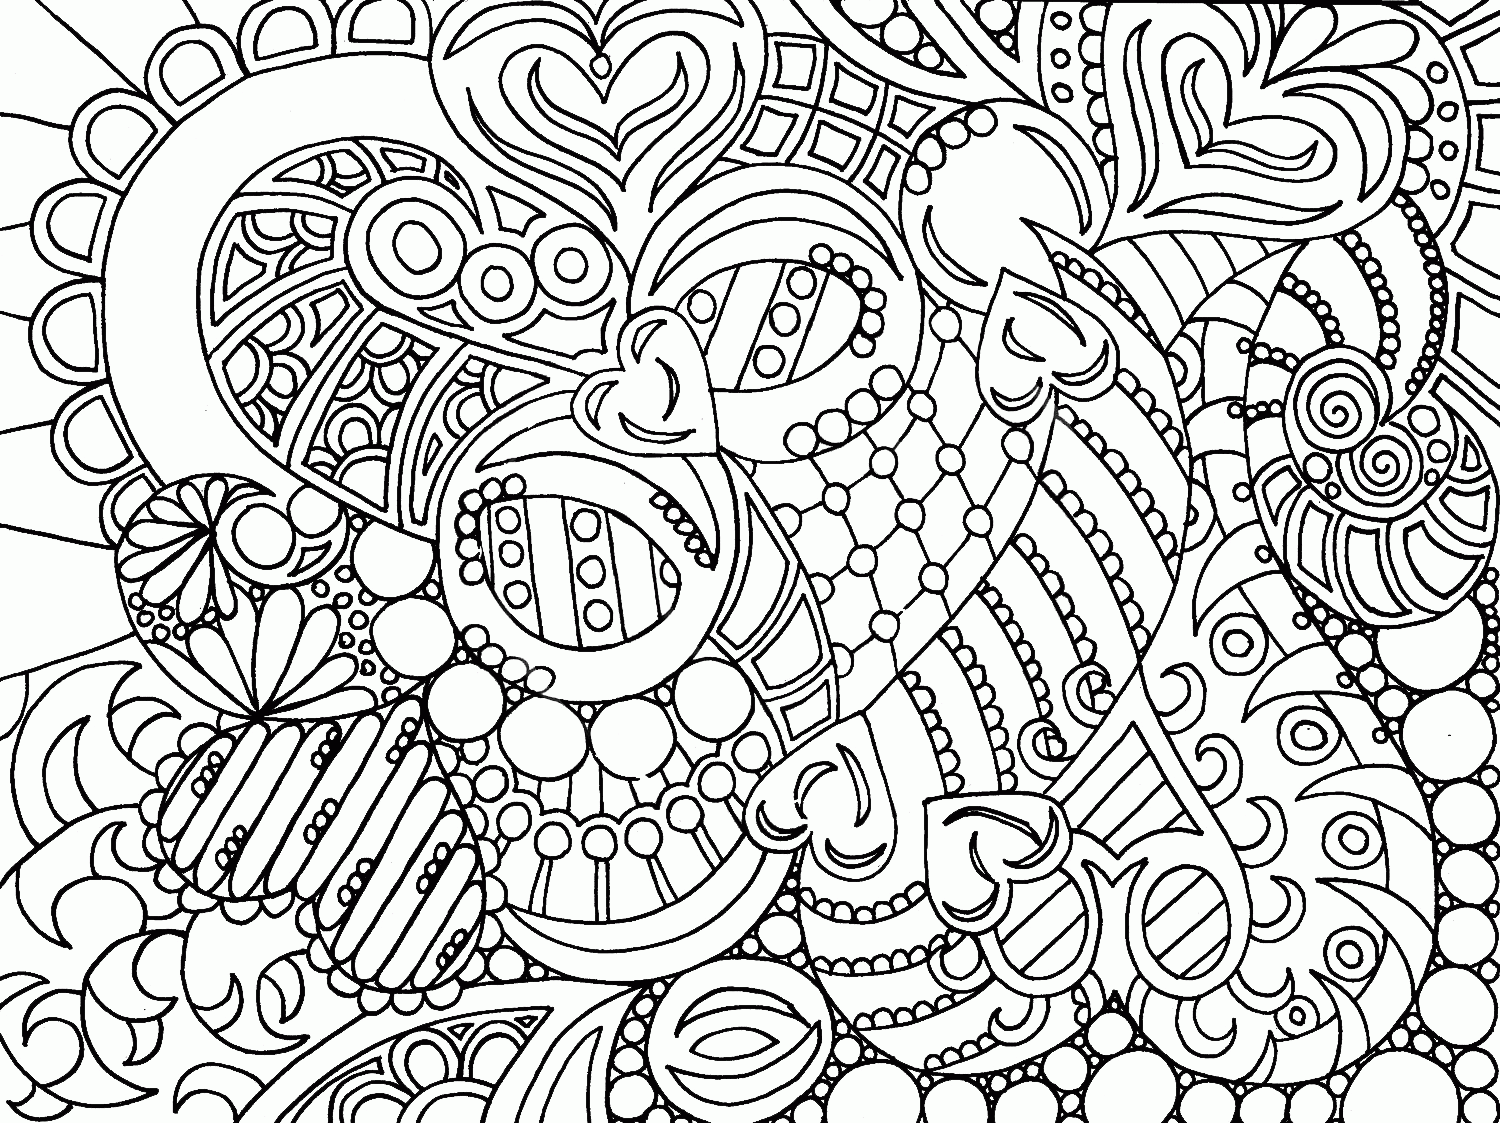 Free Adult Coloring Pages Patterns Download Free Adult Coloring Pages 